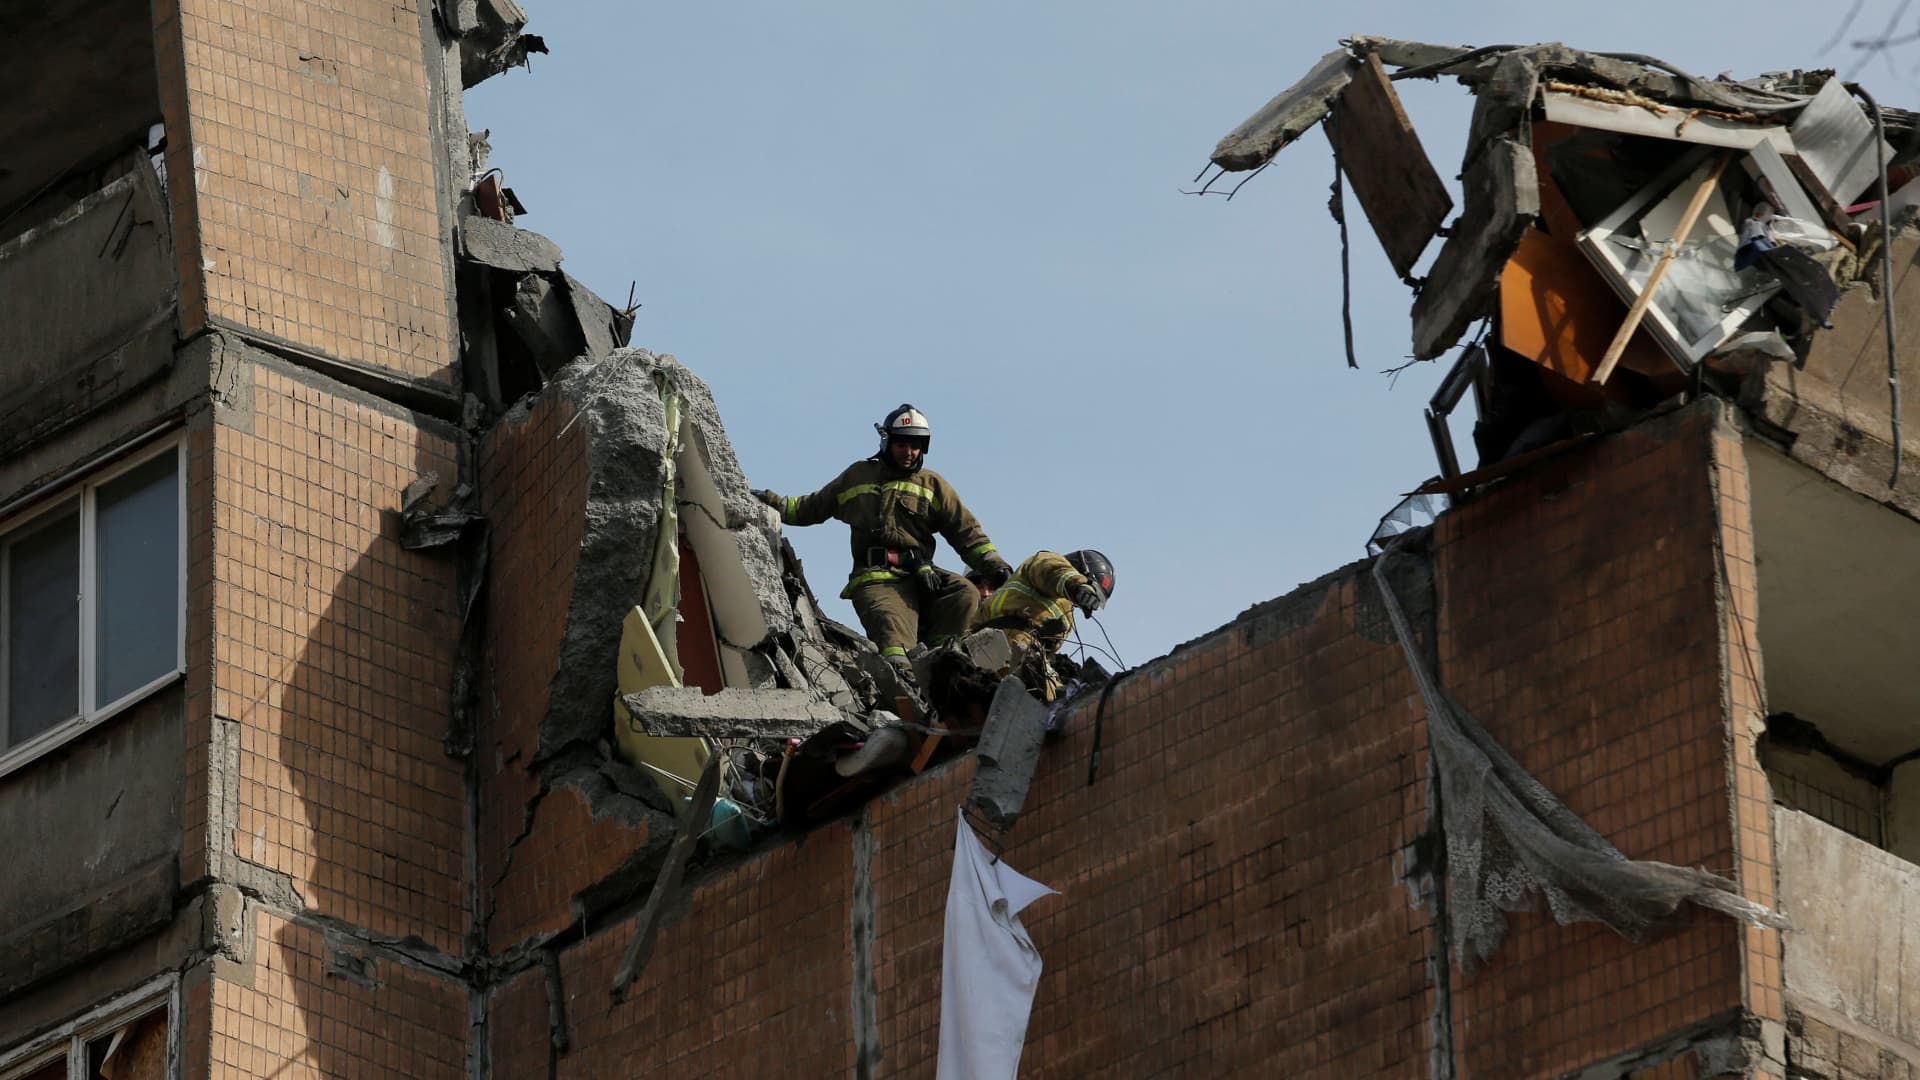 Firefighters work at a residential building damaged by shelling during Ukraine-Russia conflict in the separatist-controlled city of Donetsk, Ukraine March 30, 2022.